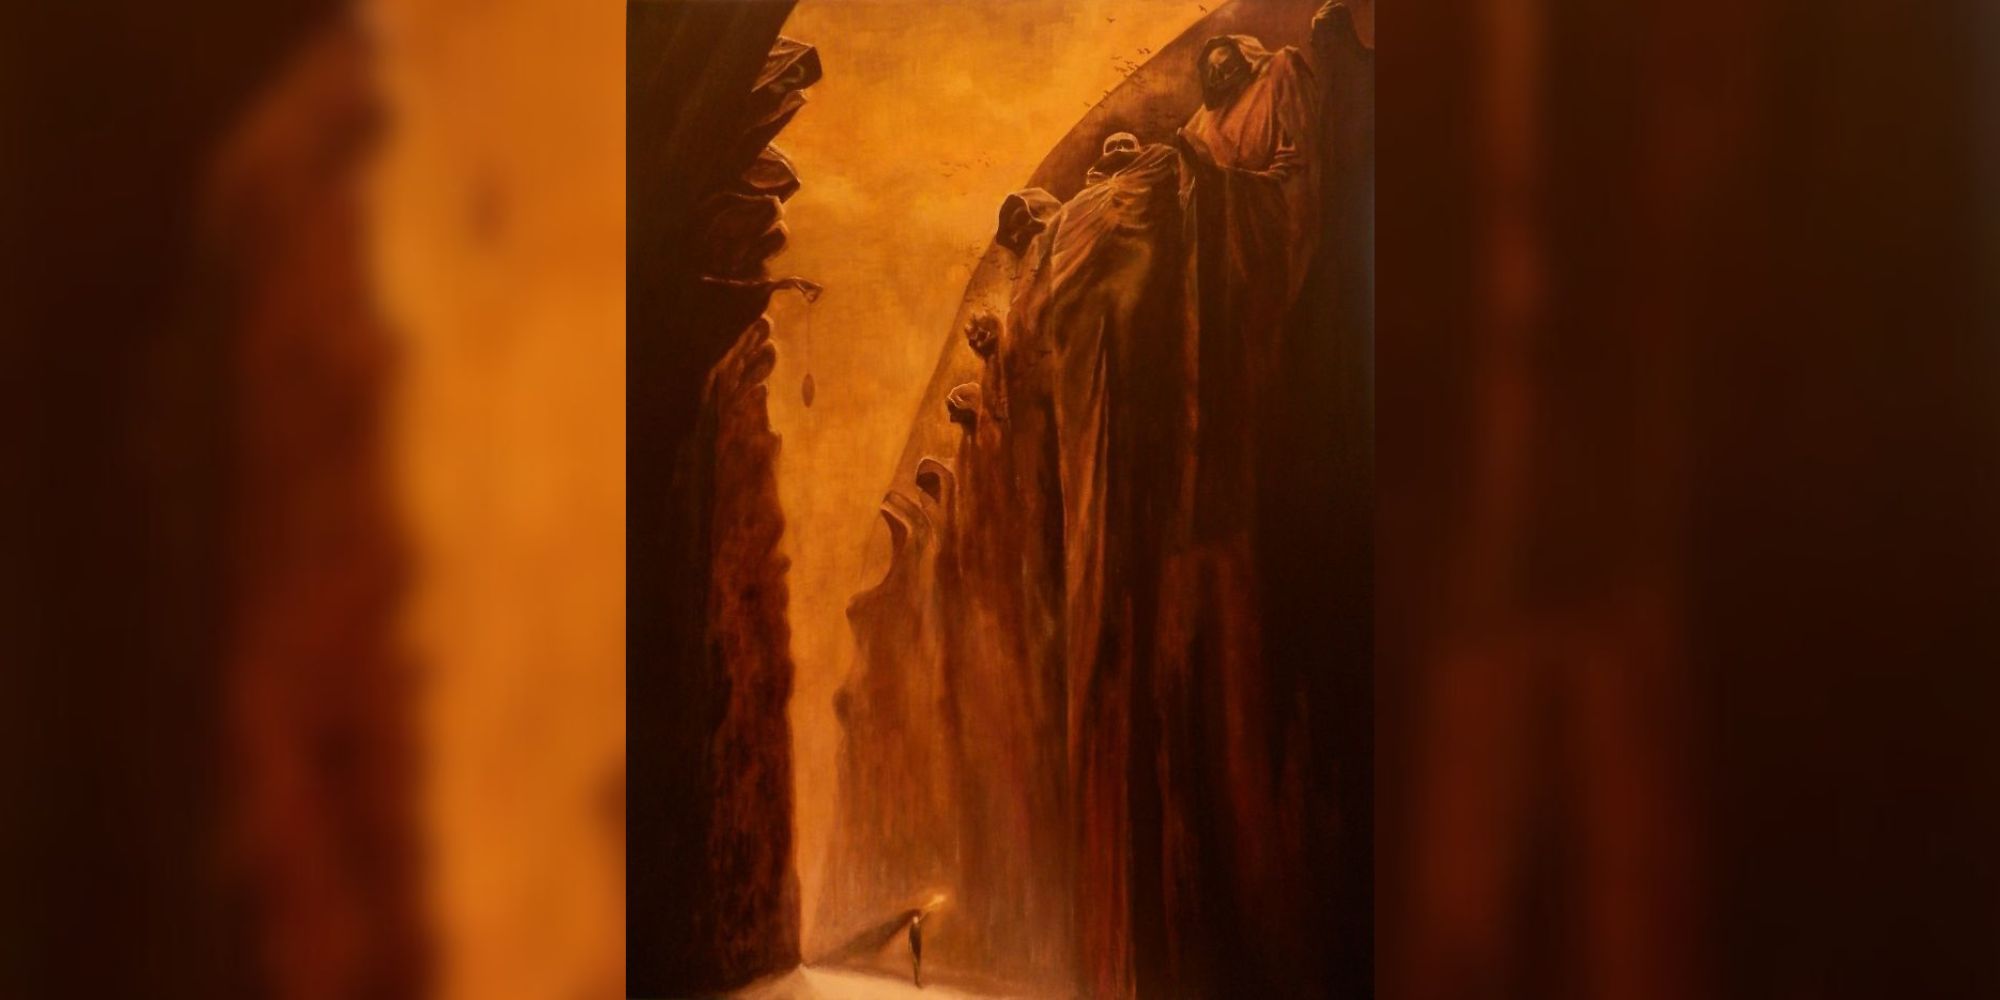 Screenshot of a Zdzisław Beksiński painting featuring a person walking down a pathway of towering grim reapers.